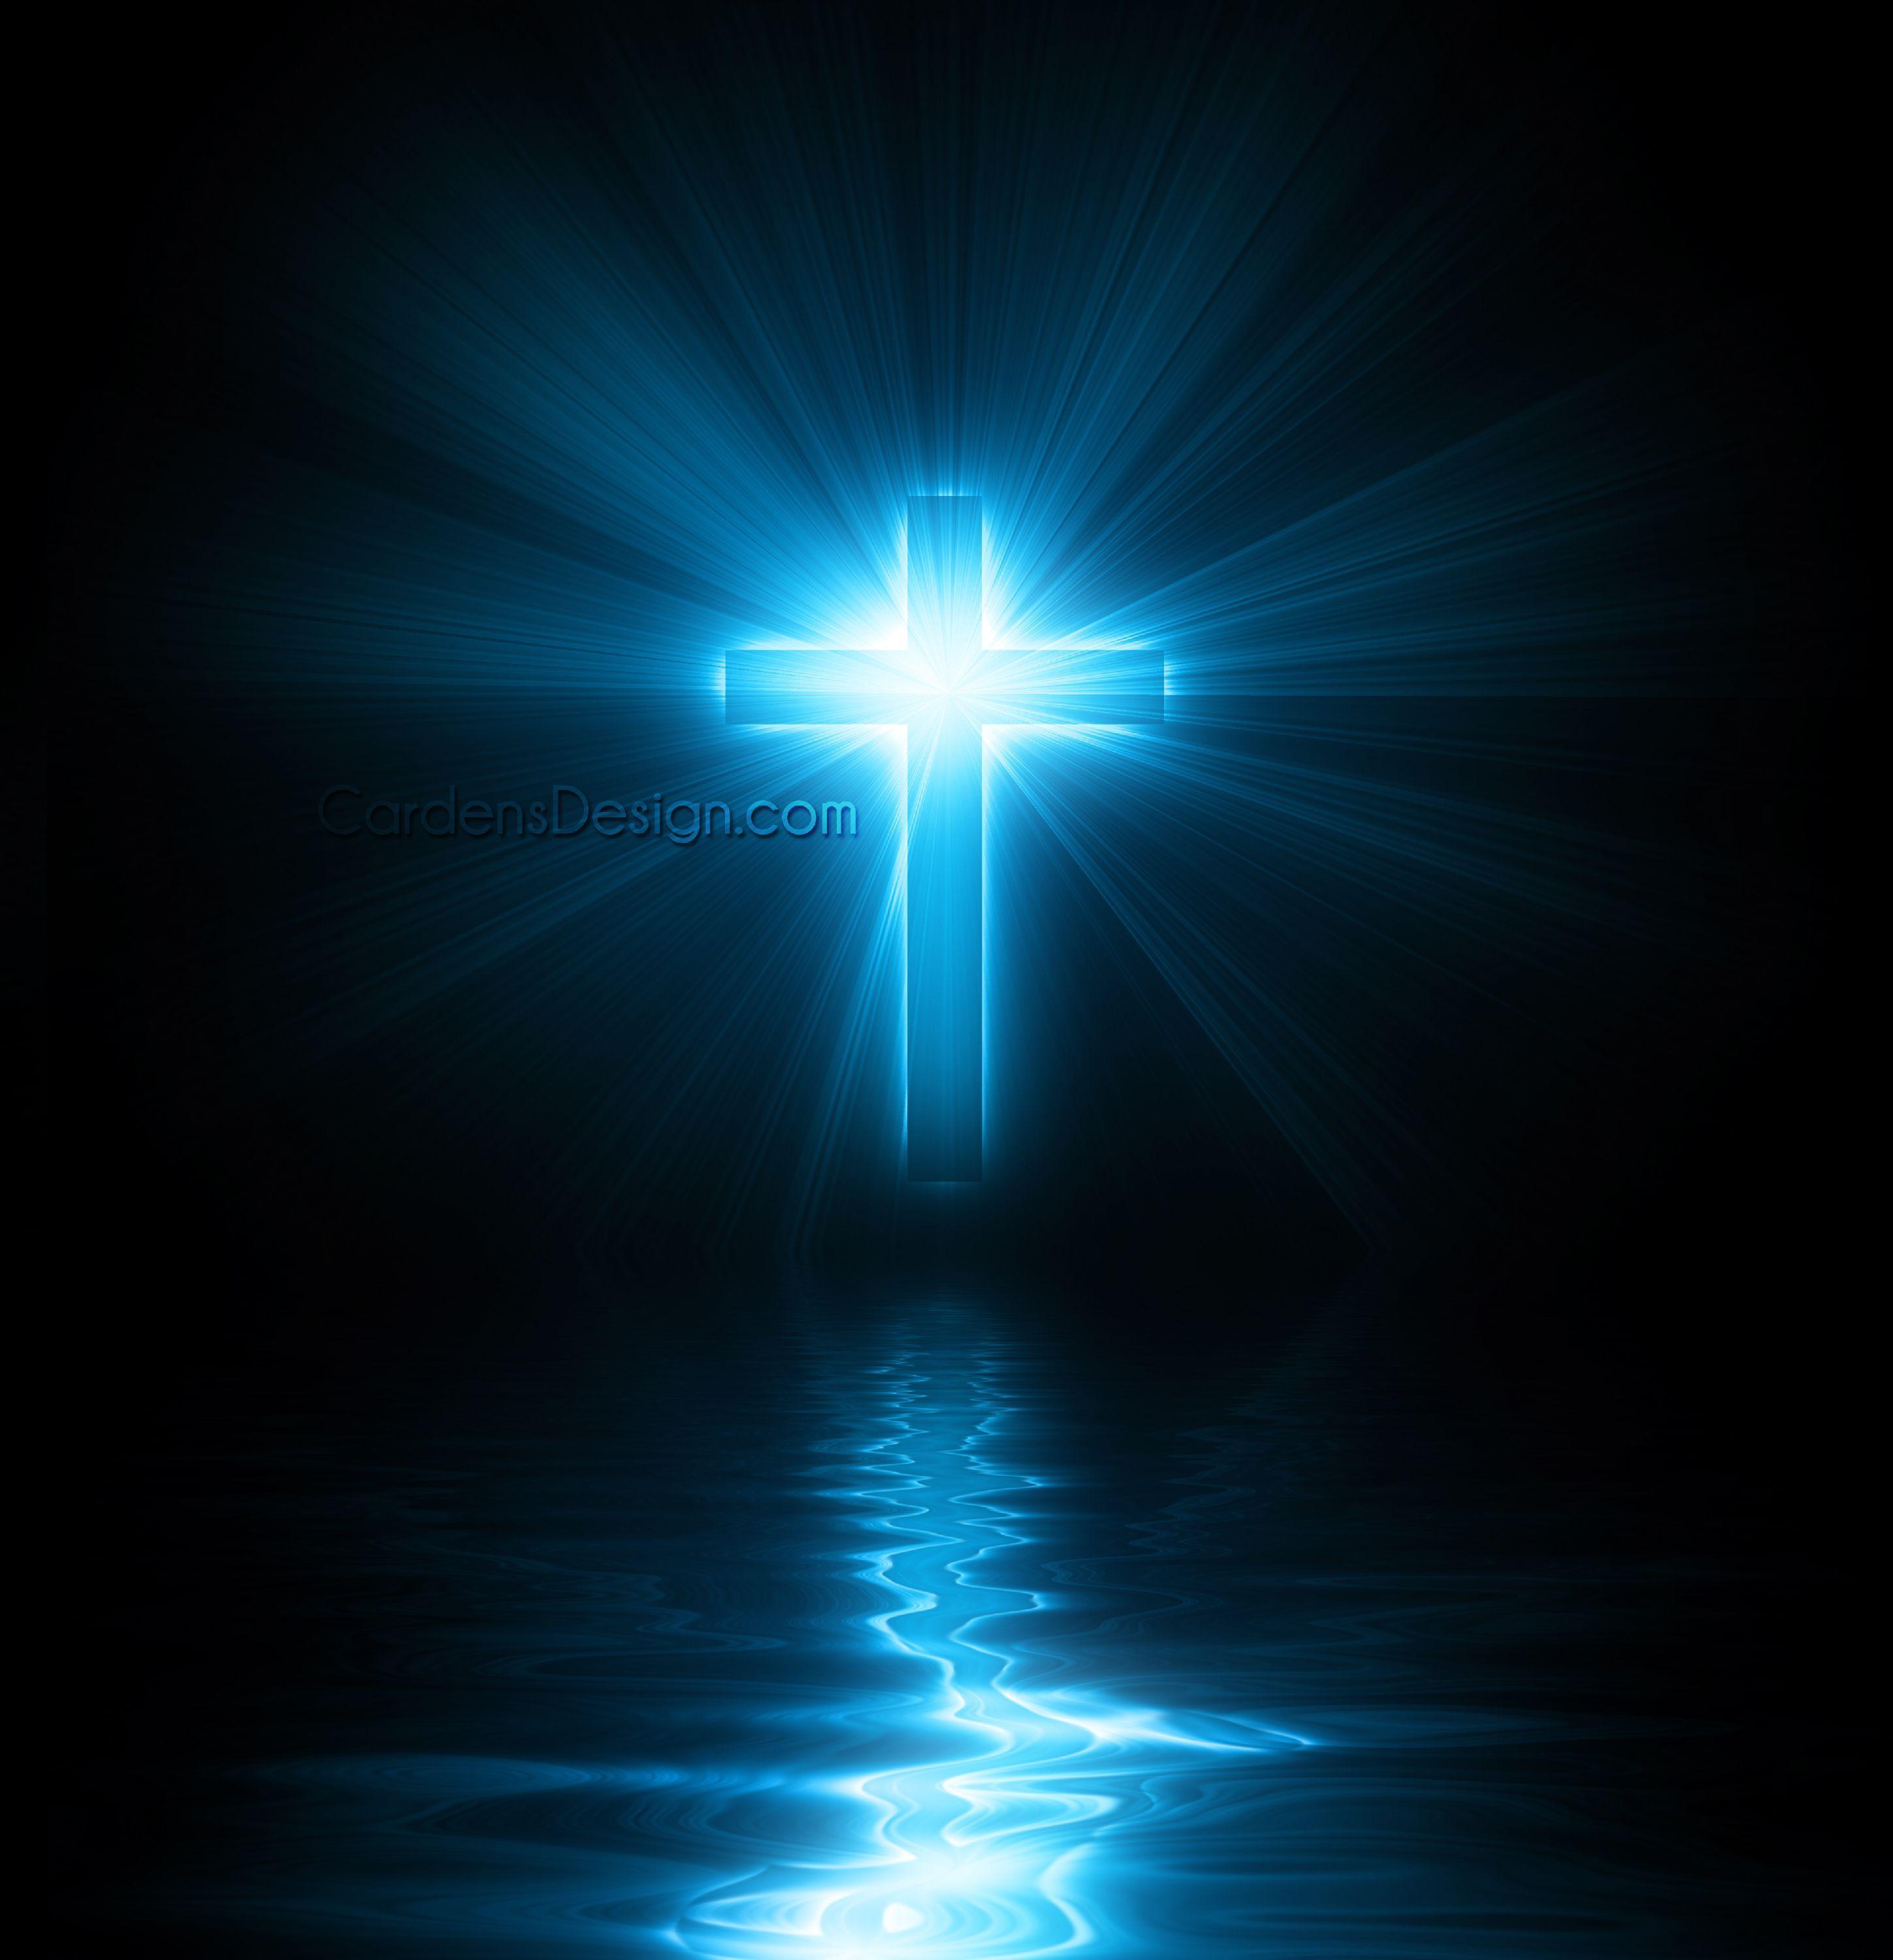 Cross Image With Background